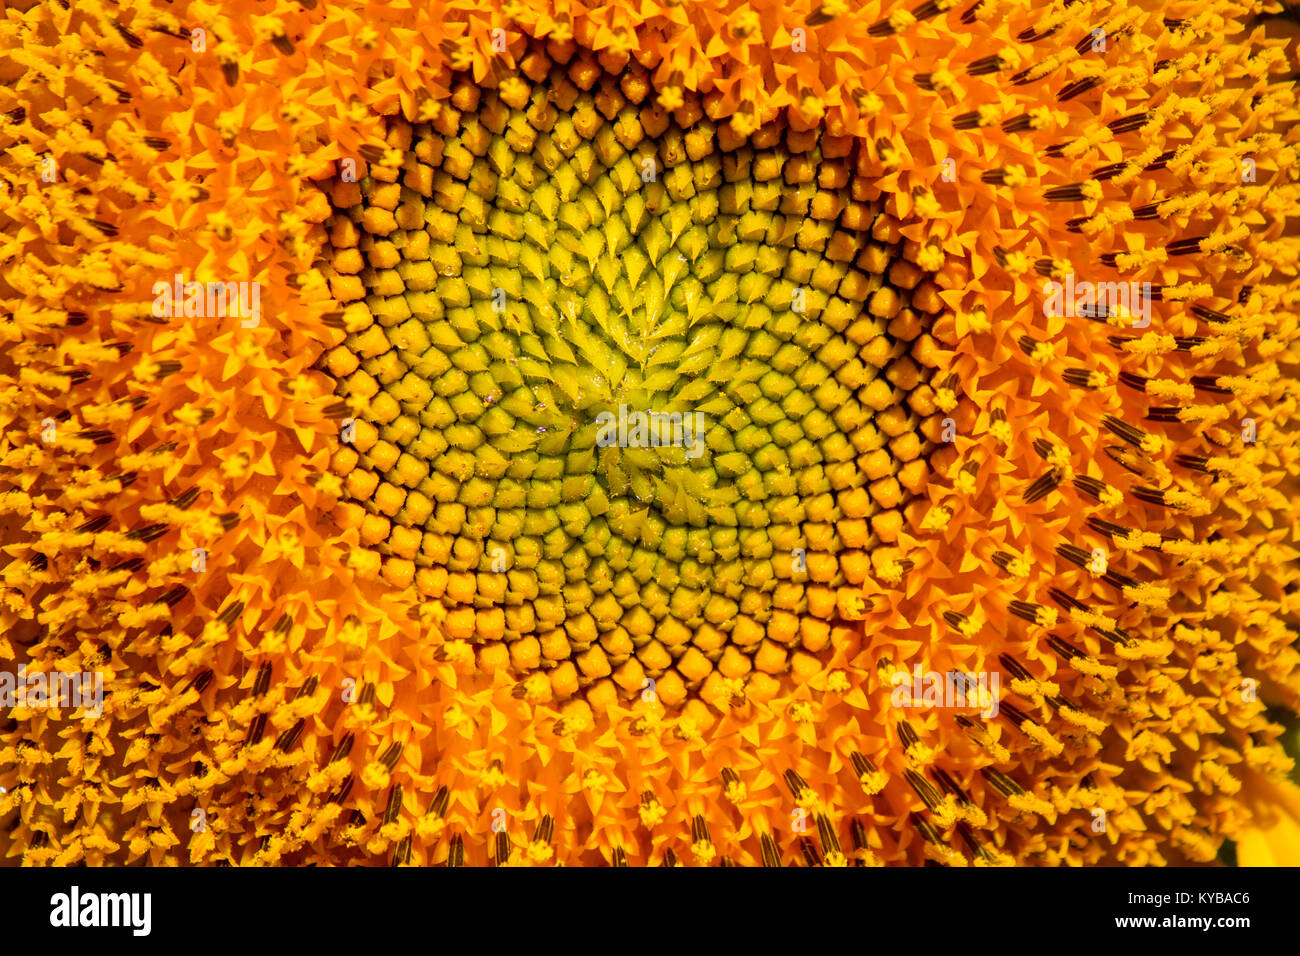 closed up middle of a sunflower, fresh yellow pollen with young seed pattern Stock Photo